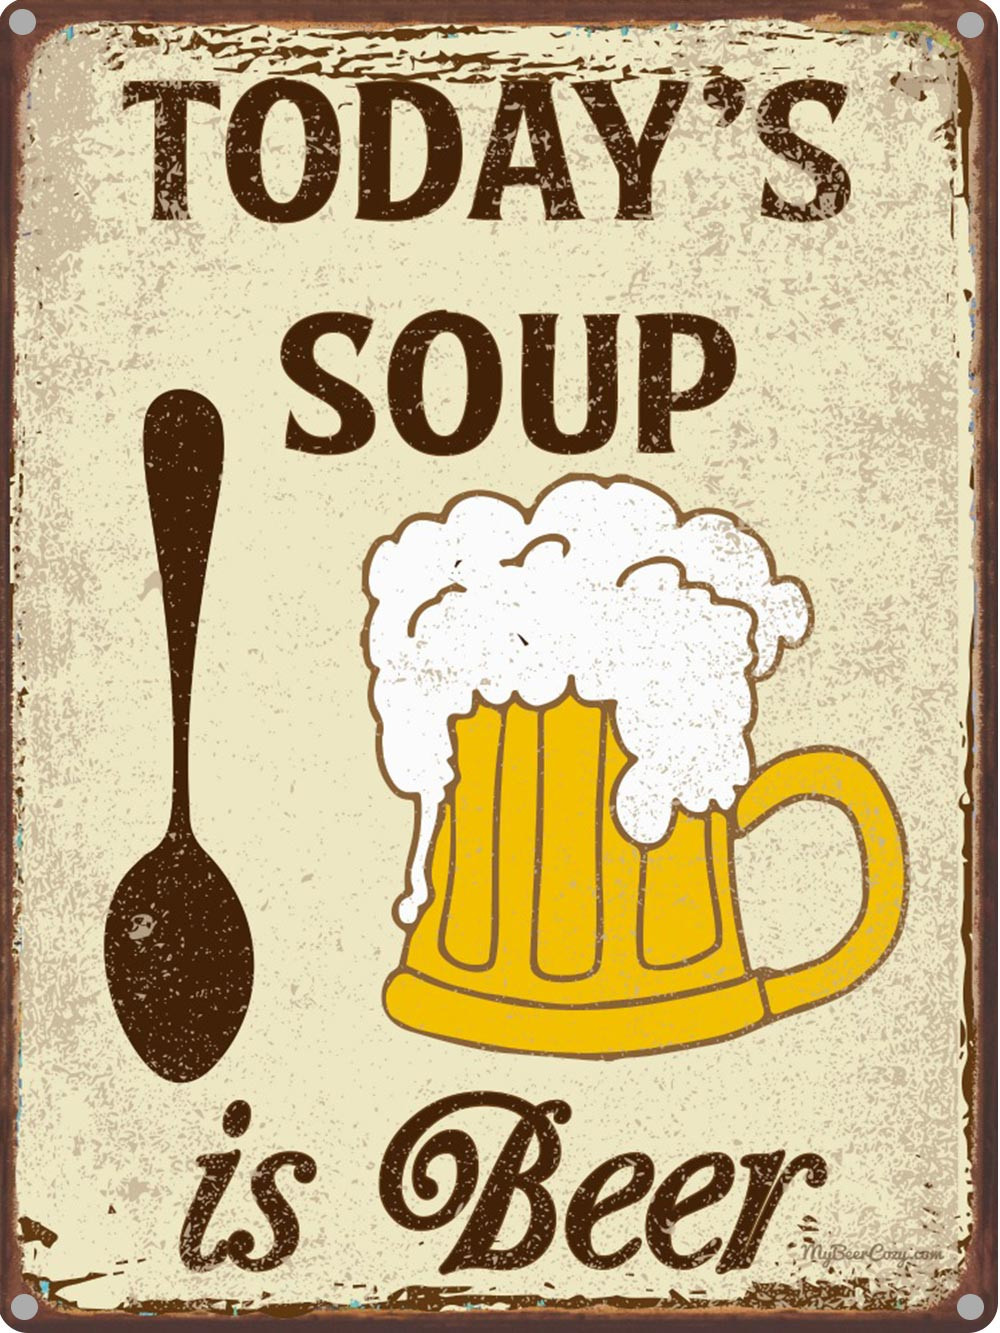 Funny Beer Quotes
 Today s Soup is Beer Funny Beer Quotes